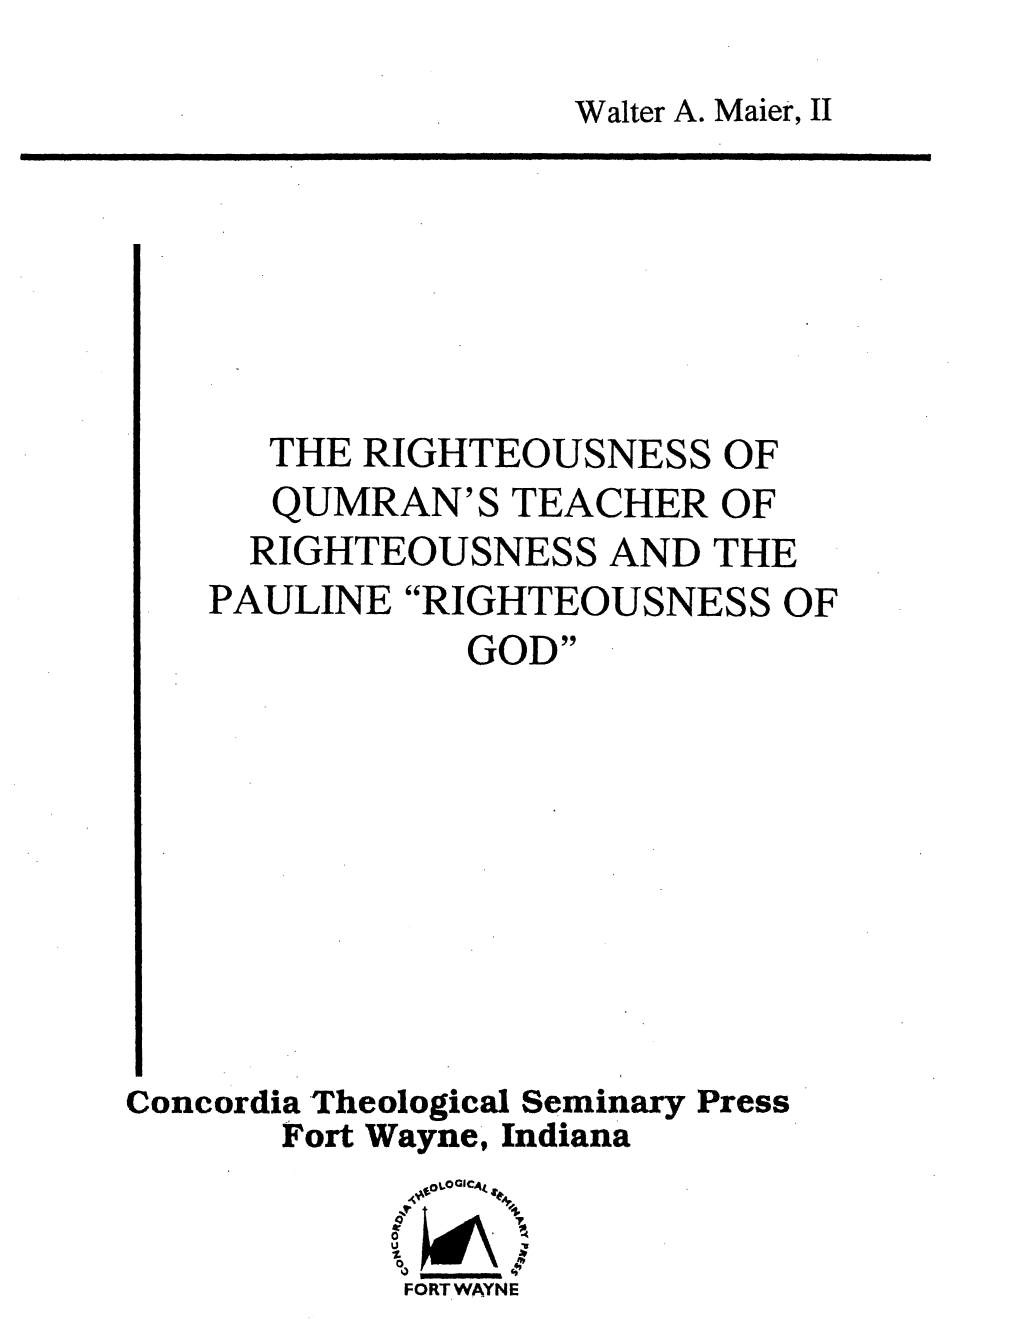 The Righteousness of Qumran's Teacher of Righteousness and the Pauline "Righteousness of God"